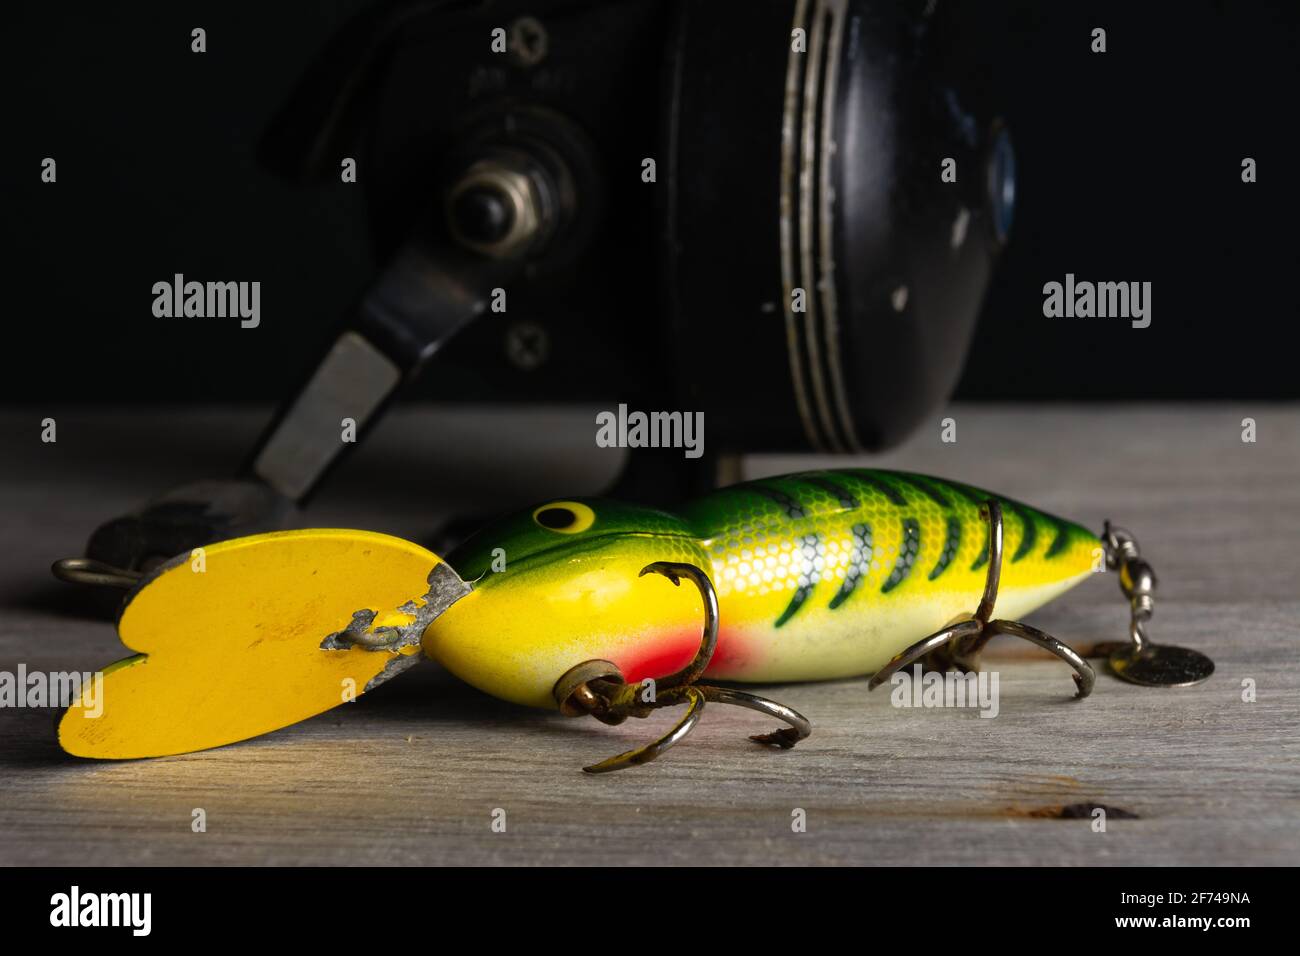 Vintage fishing tackle on old wood and black background Stock Photo - Alamy